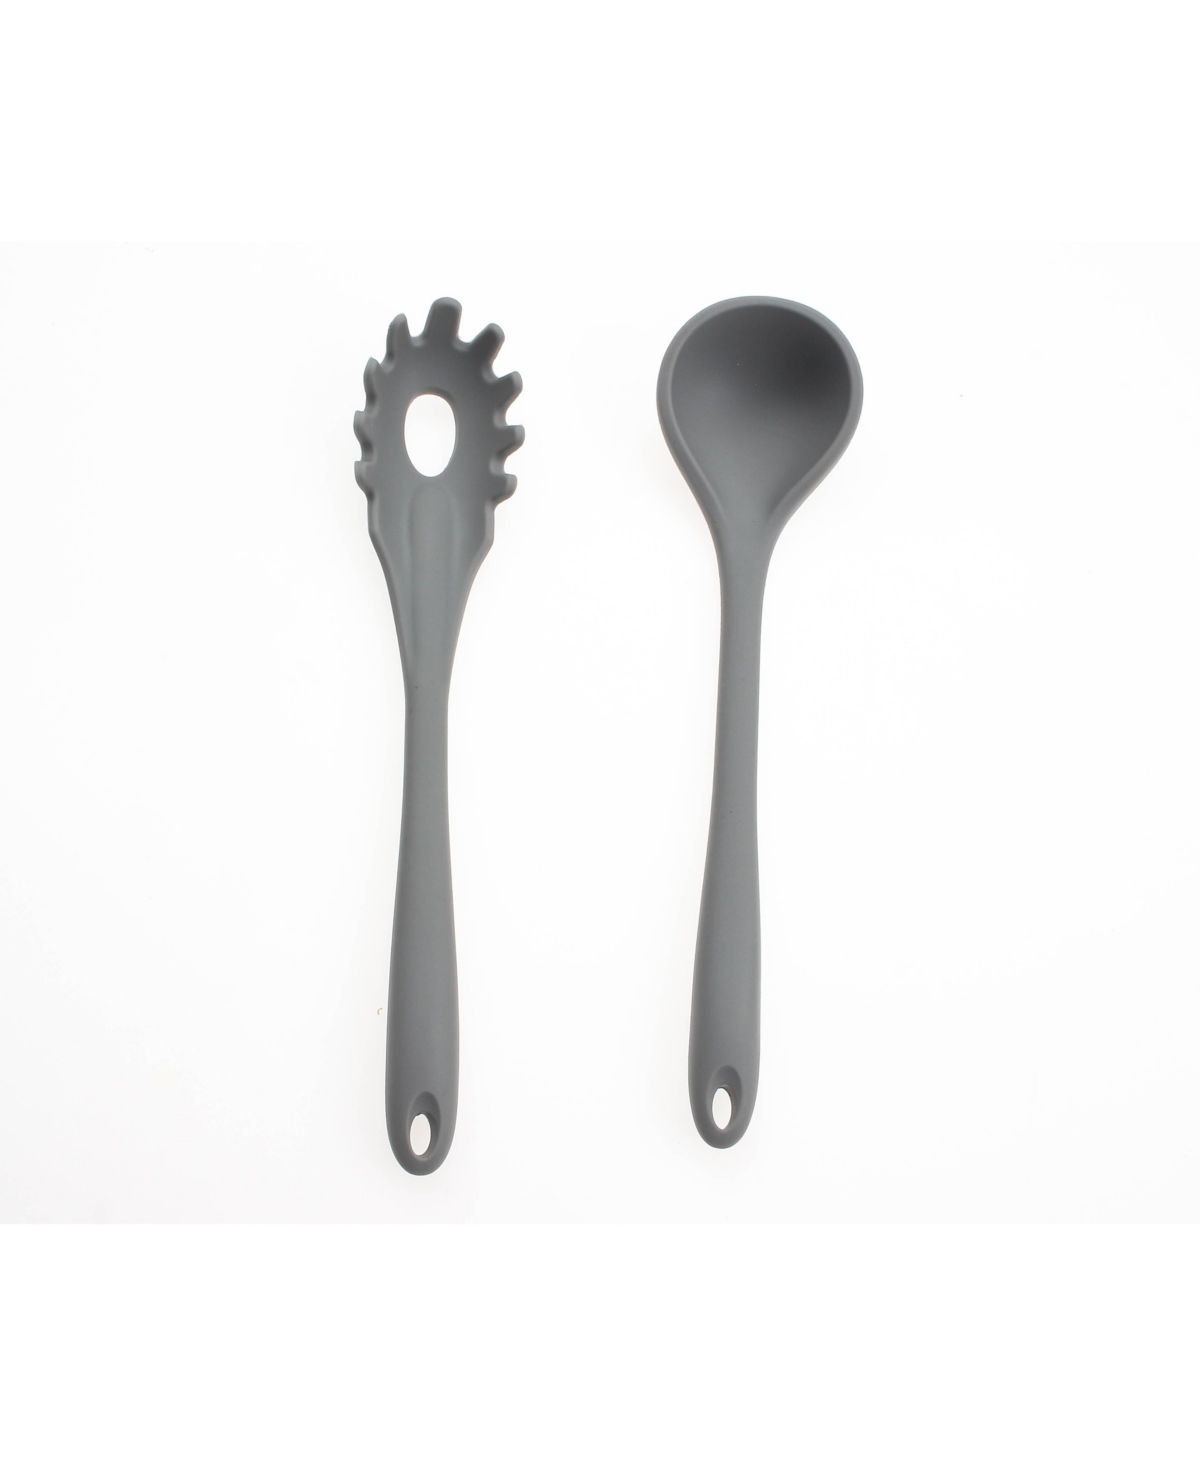 Art & Cook 2 Piece Silicone Soup Ladle And Pasta Fork Set In Gray